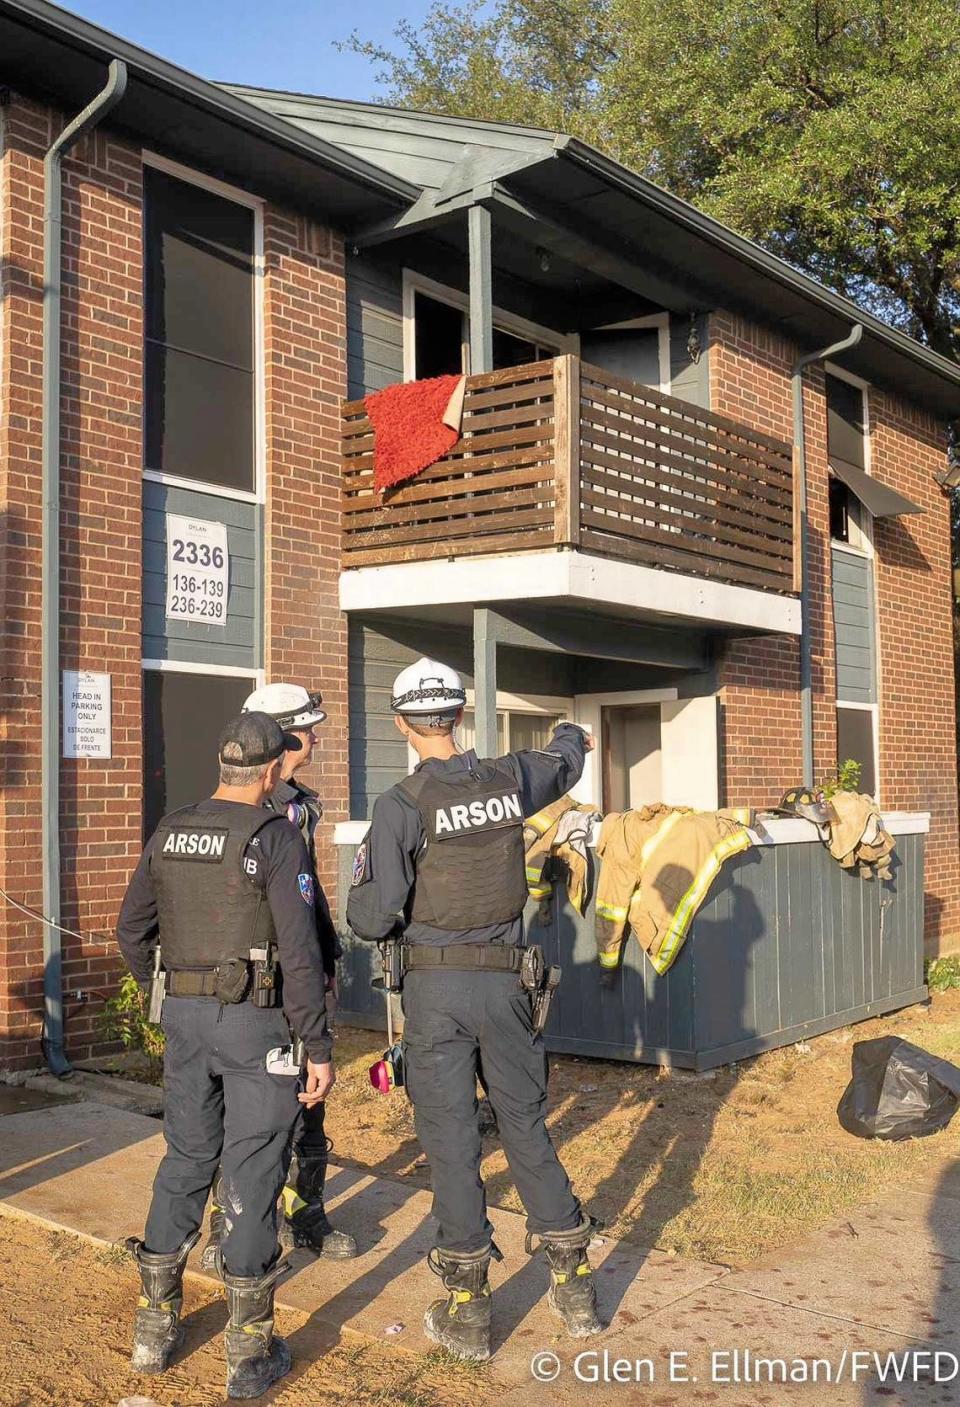 Two injured children were flown by helicopter to Parkland hospital in Dallas after an apartment fire in Fort Worth on Sunday, July 3, 2022. A man and two other children escaped from the apartment through a second-story window, firefighters said.